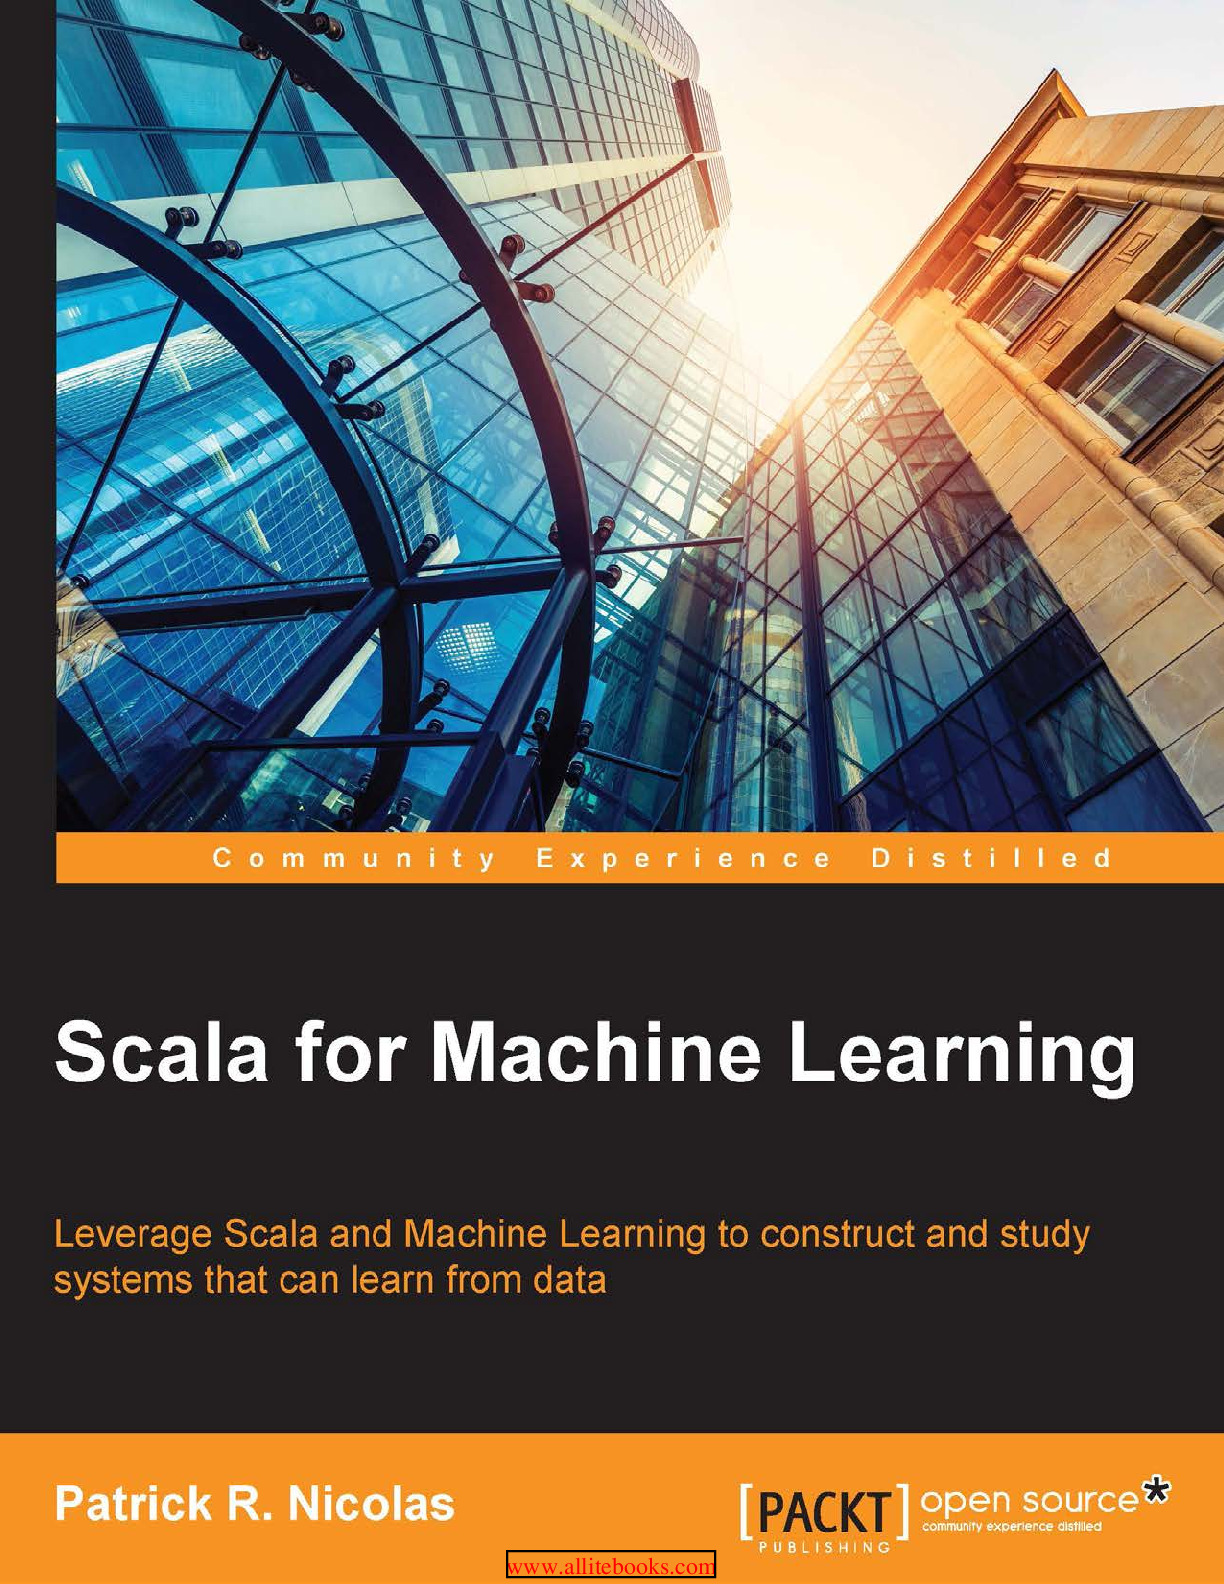 Scala-for-Machine-Learning